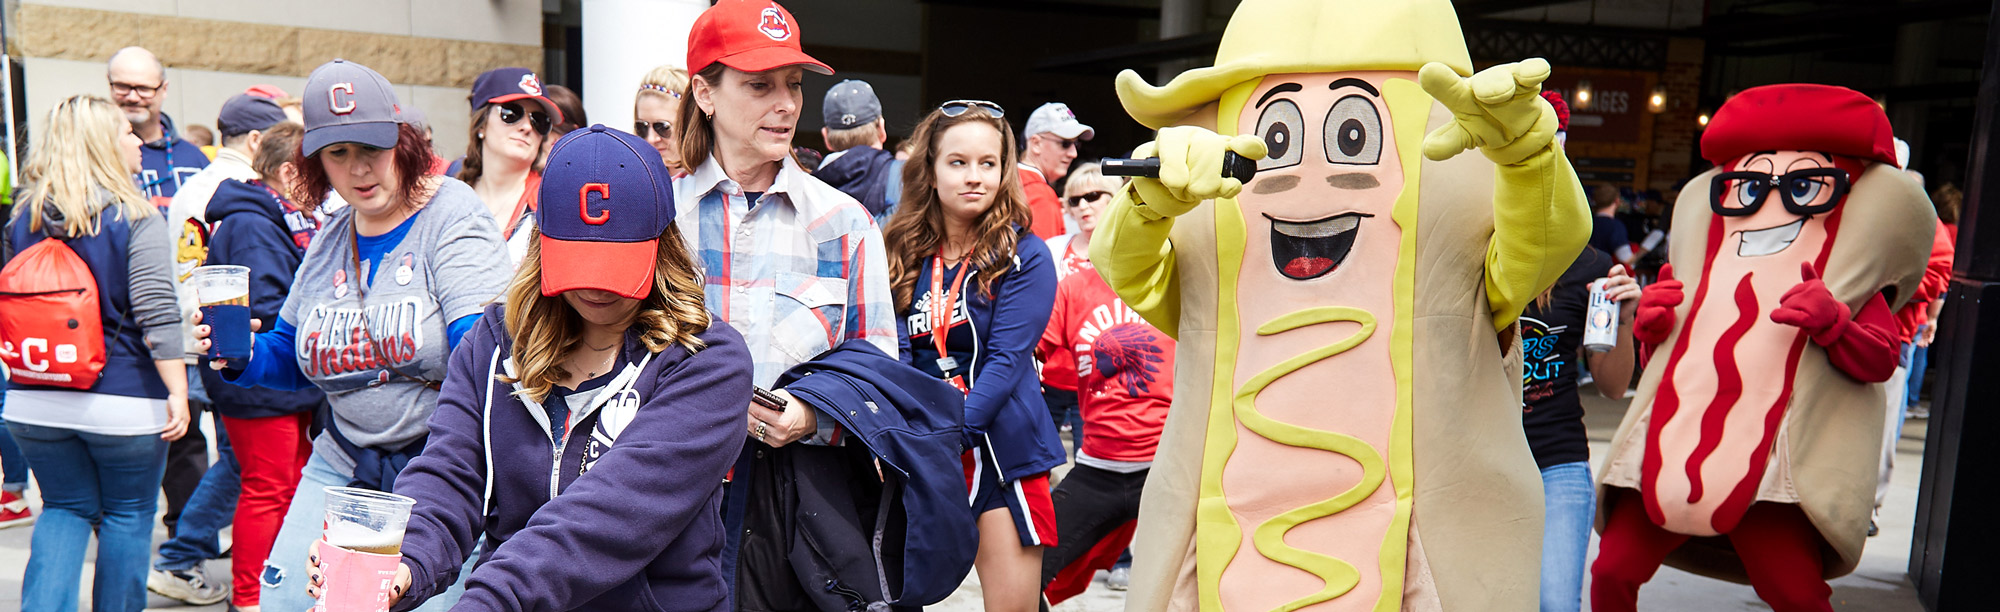 Cleveland Indian's hot dog mascots sing and dance